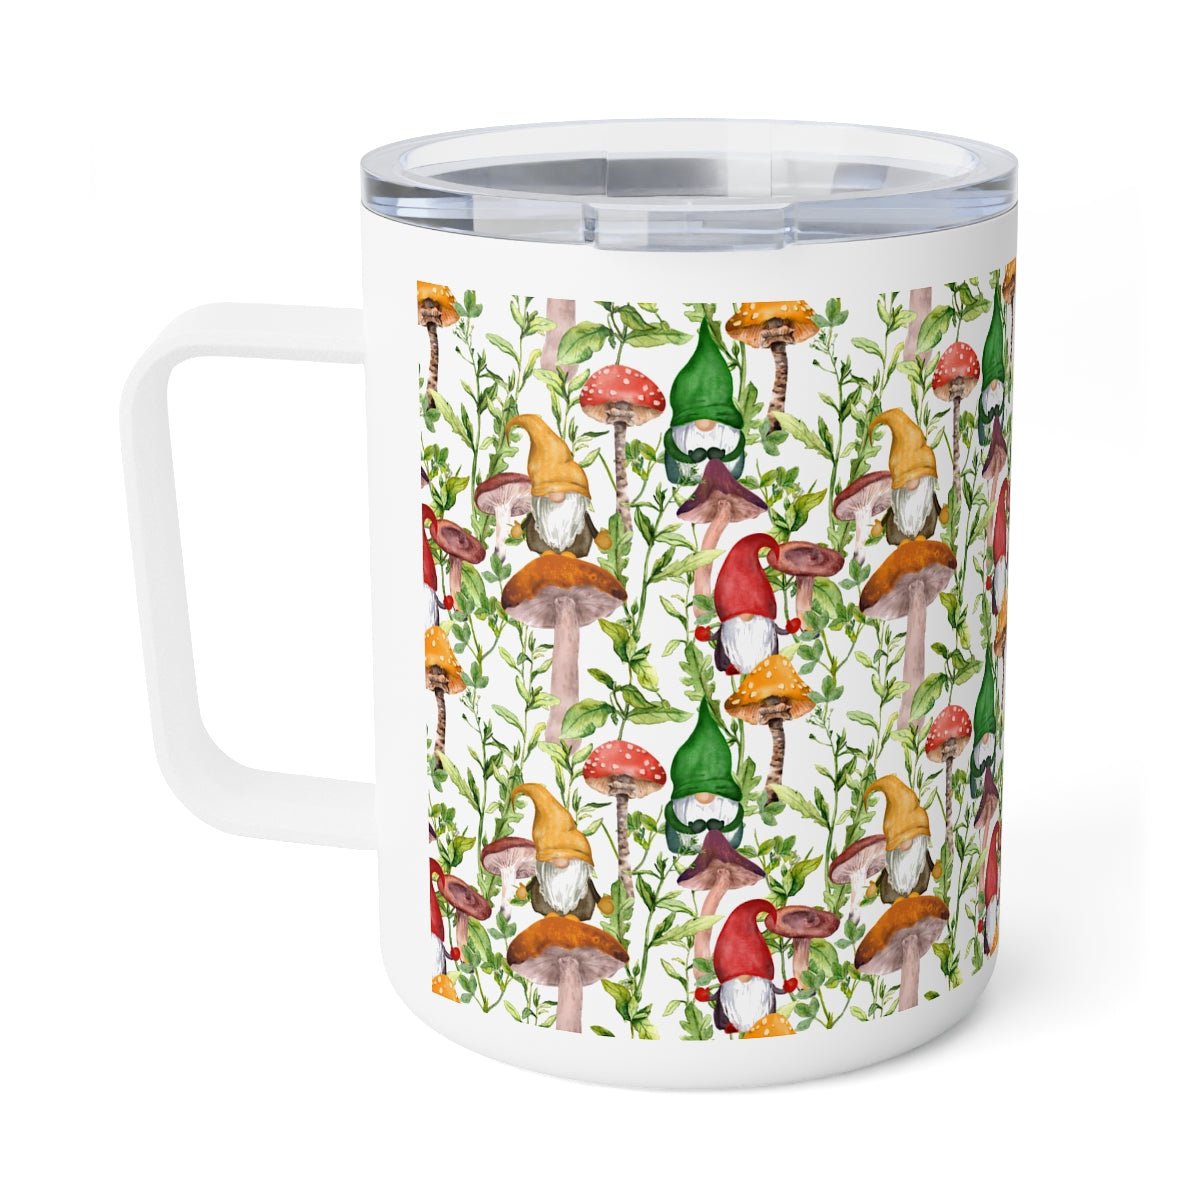 Gnomes and Mushrooms Insulated Coffee Mug - Puffin Lime